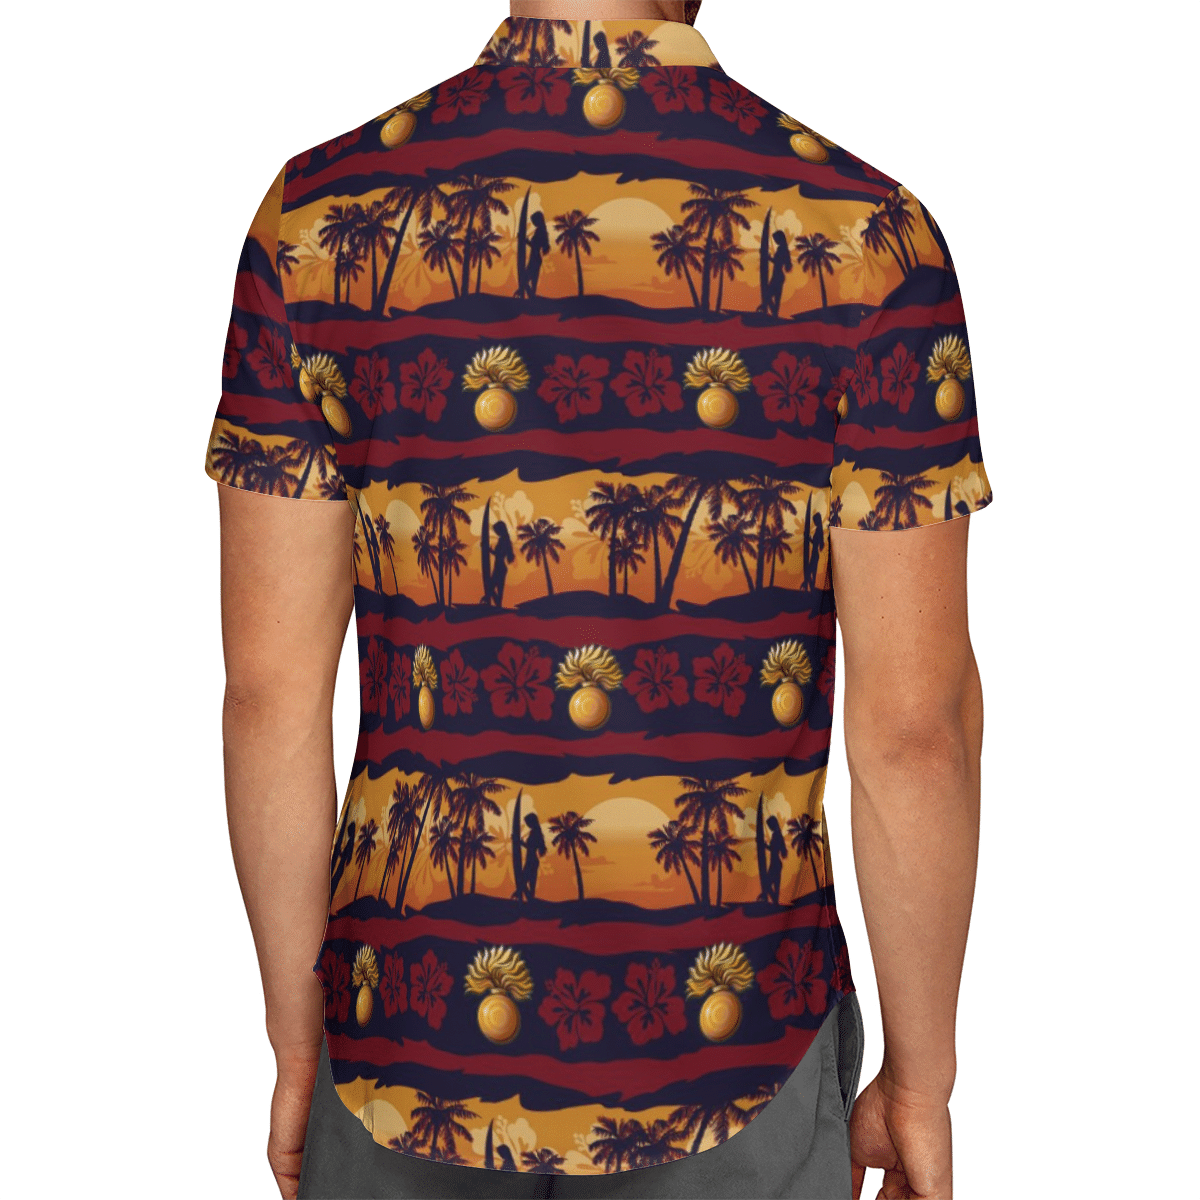 Going to the beach with a quality shirt 186